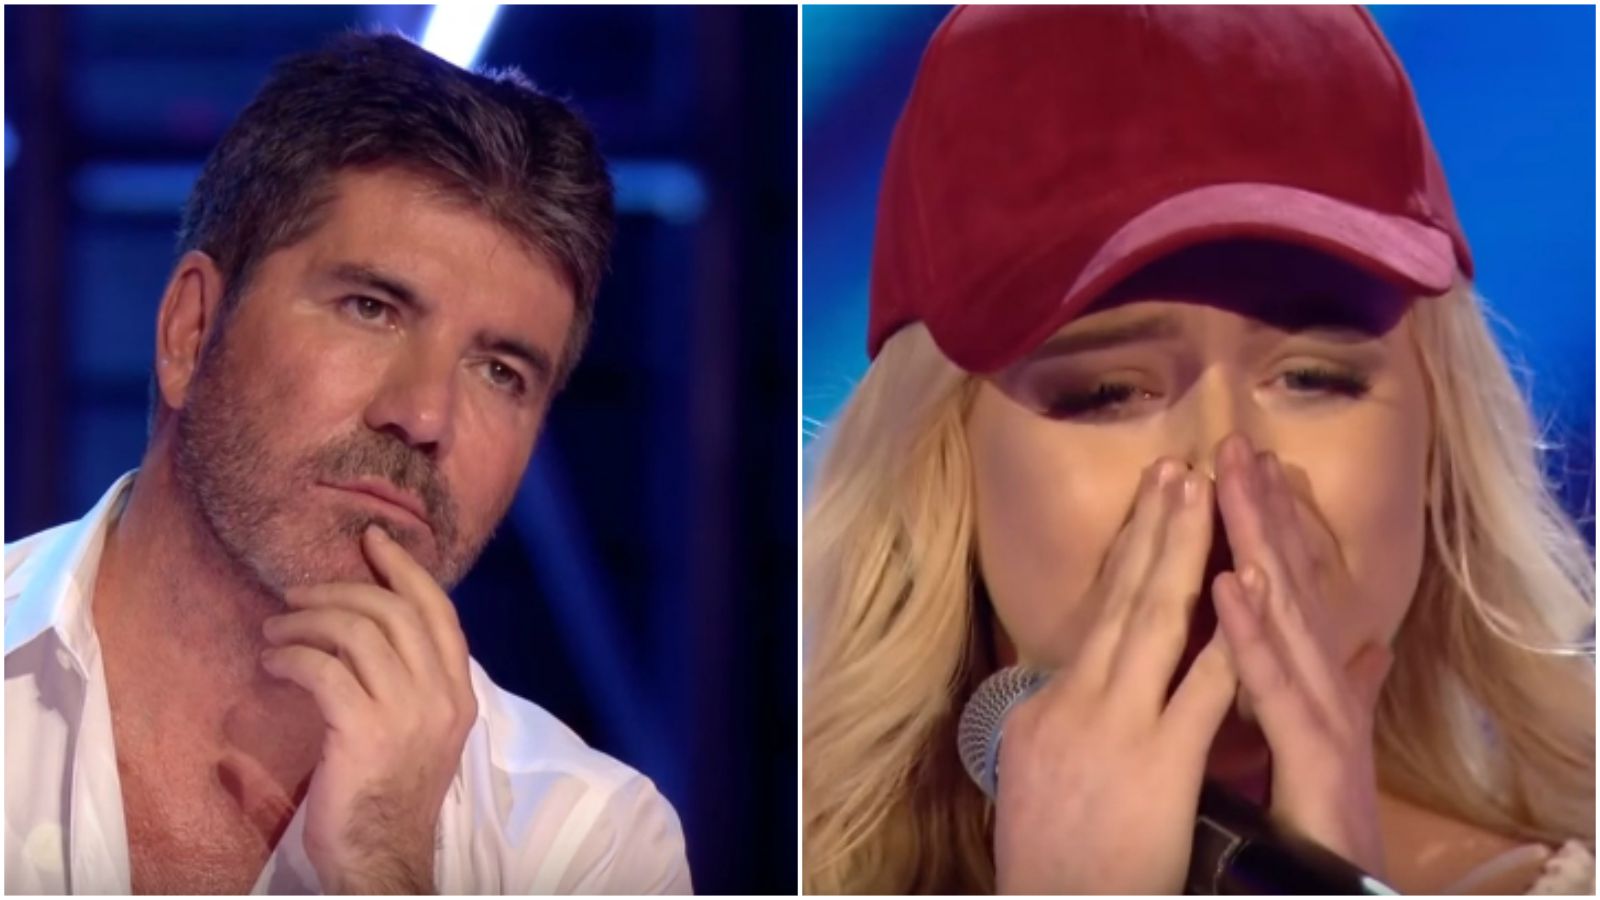 She Sings One of Simon Cowell’s Favorite Songs. His Reaction Surprises Everyone!